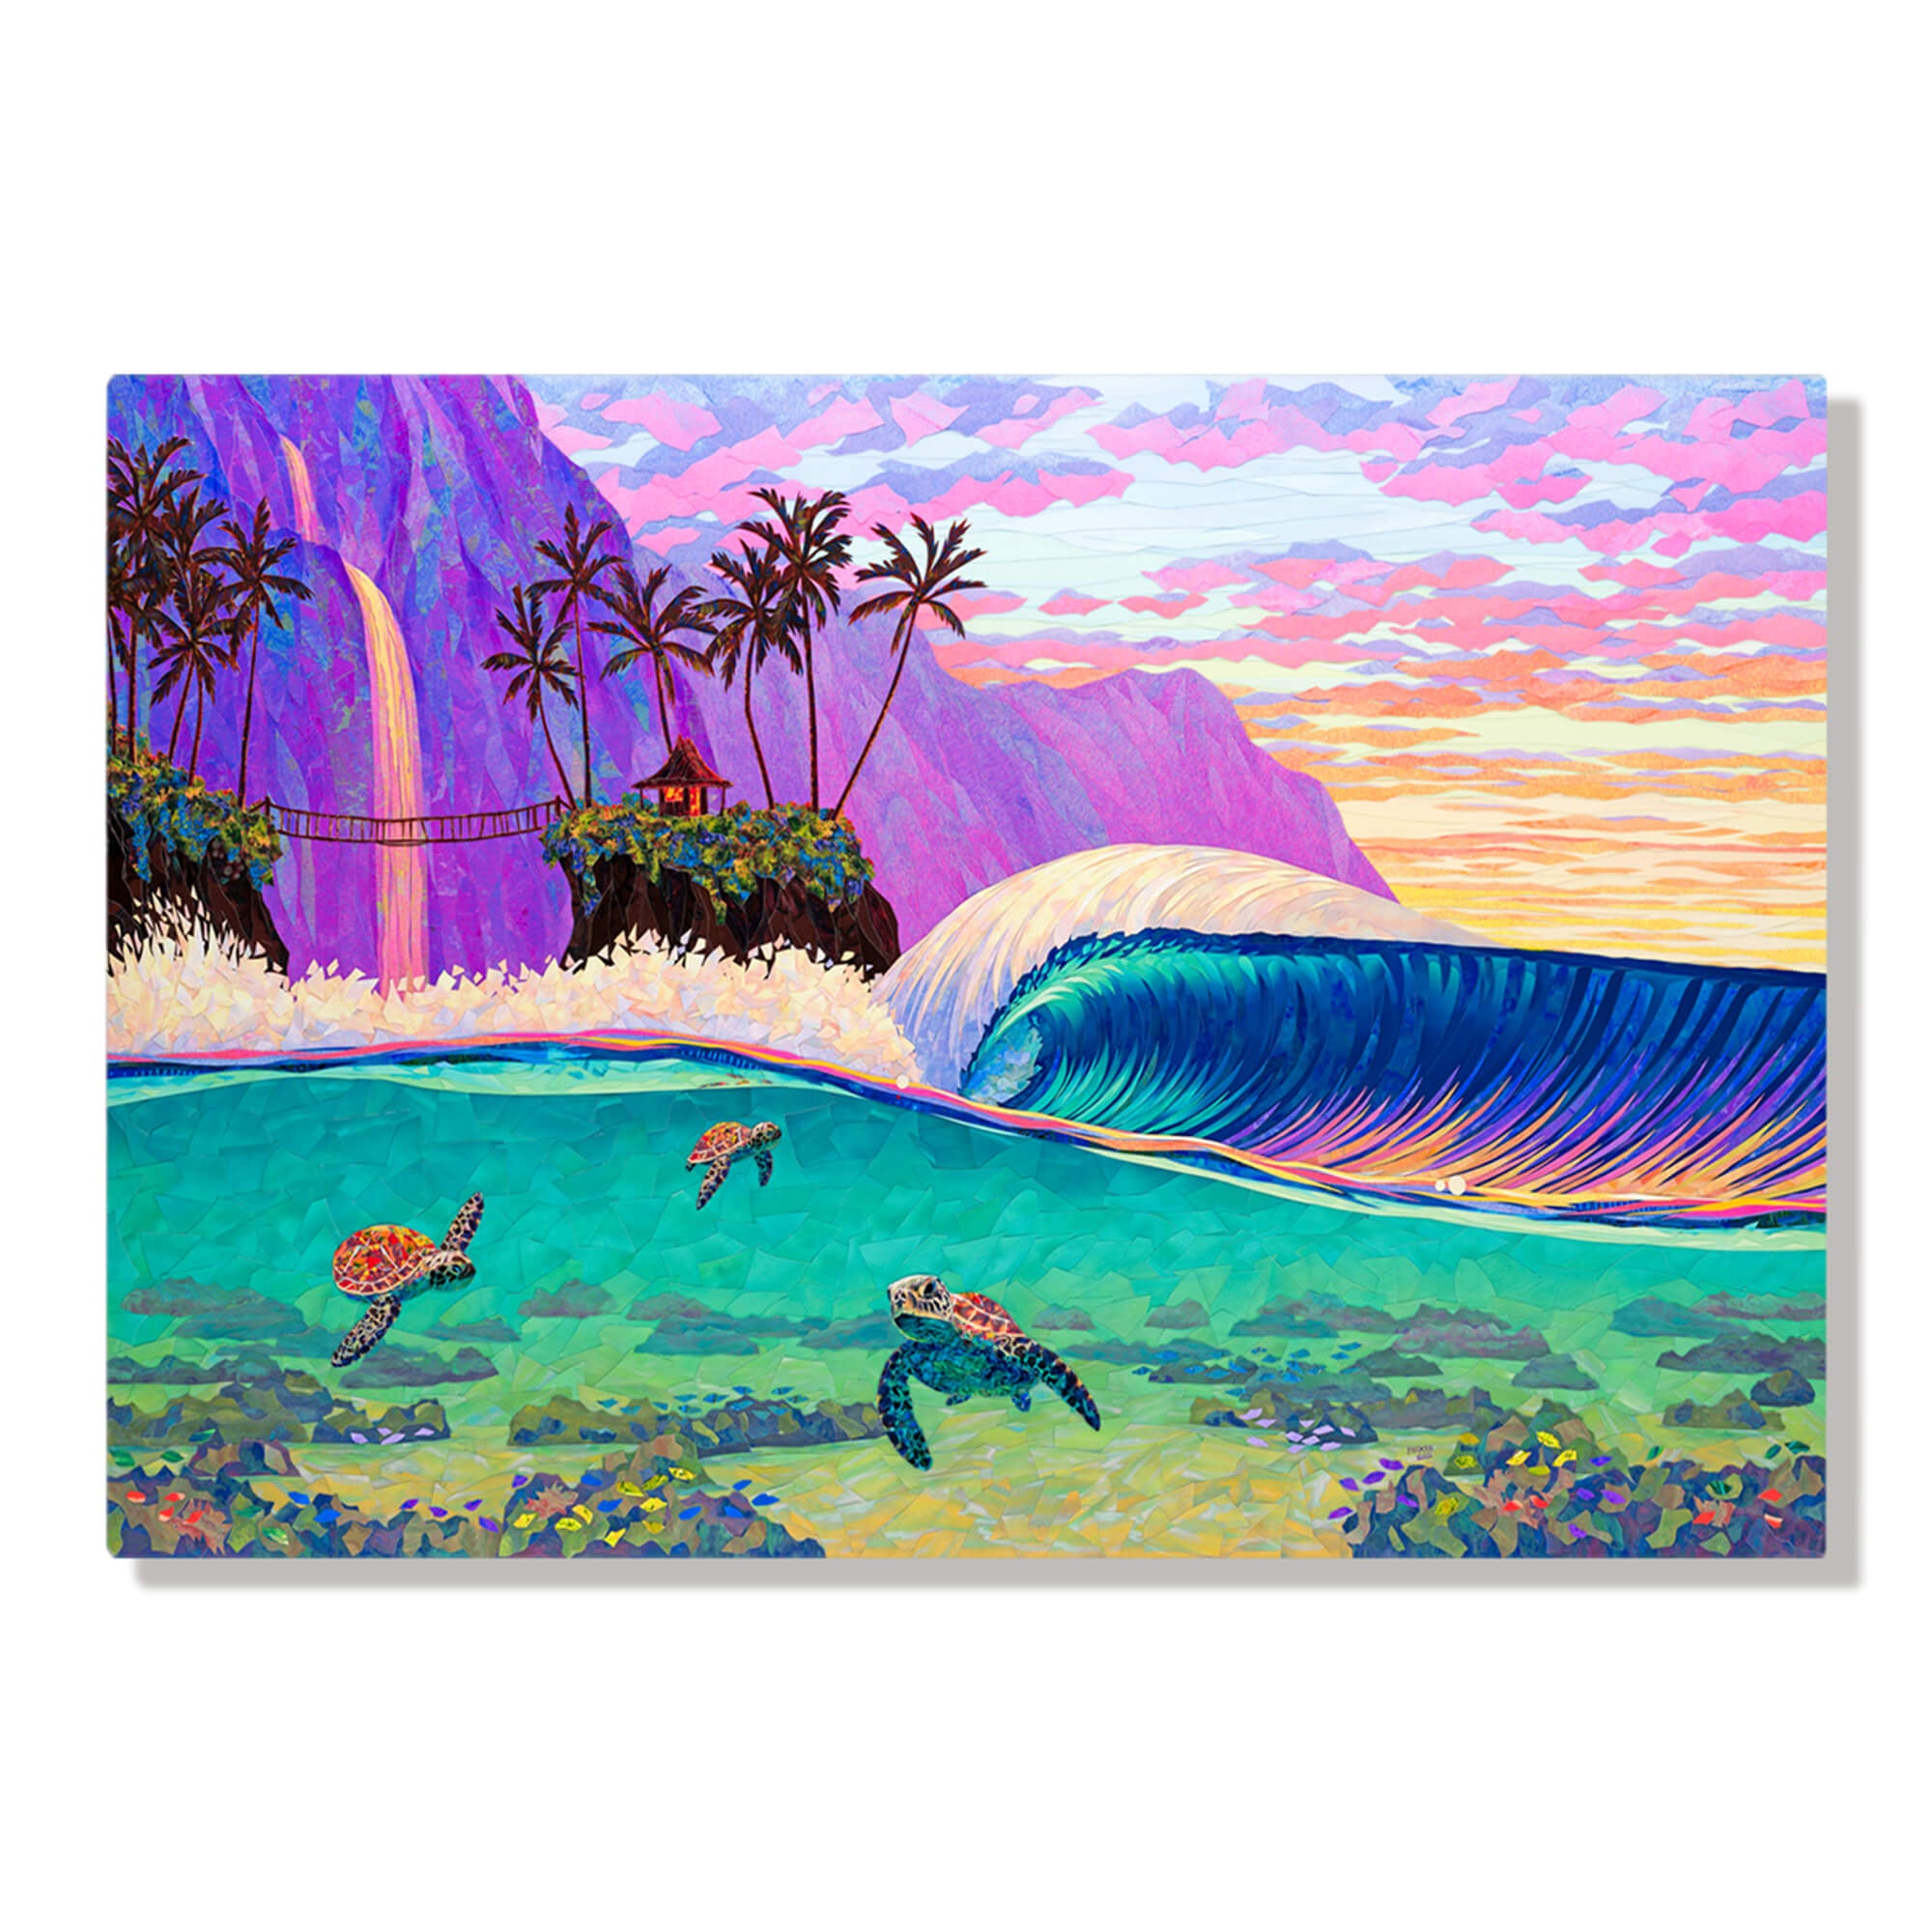 A metal art print featuring a collage of a stunning seascape with three sea turtles, a hut on an island, and a colorful mountain with a waterfall background, by Maui artist Patrick Parker